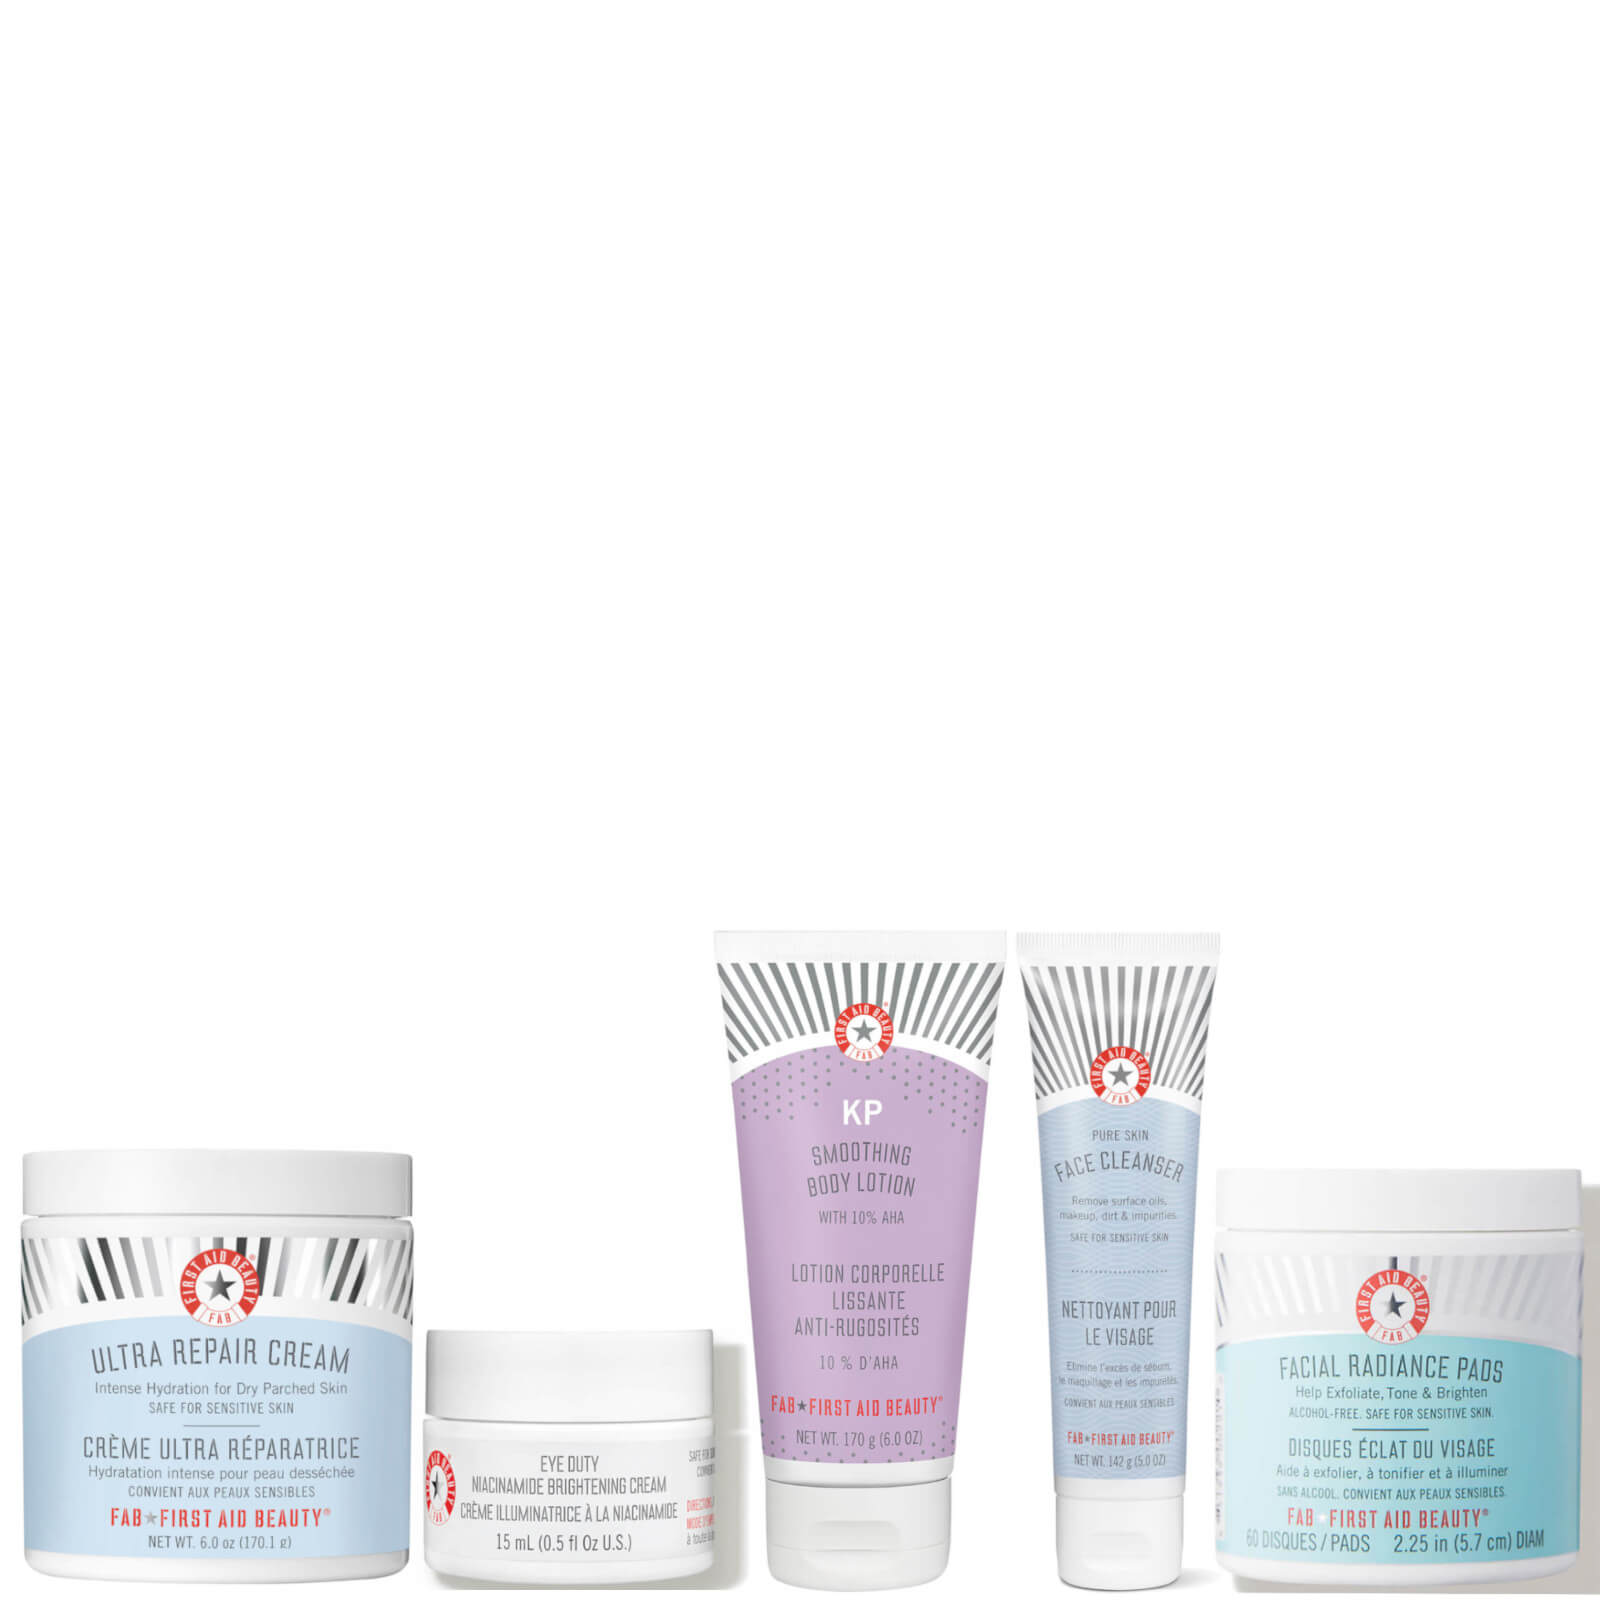 First Aid Beauty Smoother, Brighter Skin Bundle lookfantastic.com imagine